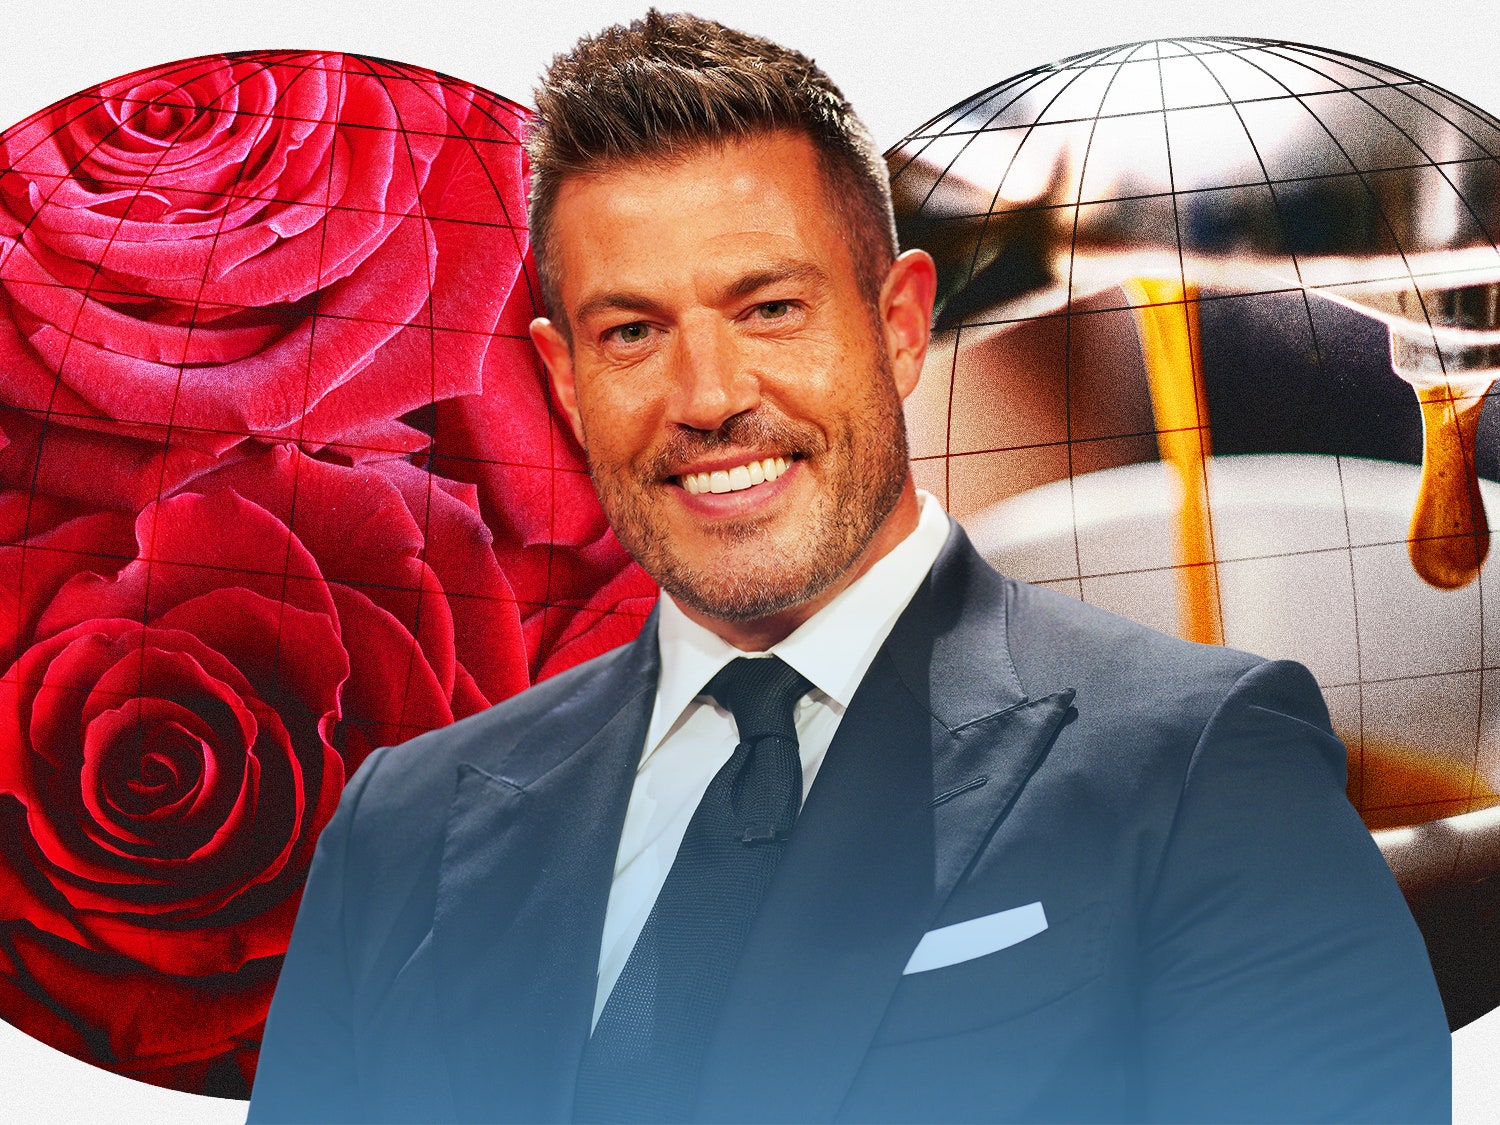 On the Road With The Bachelor Host Jesse Palmer, Who's Only Home 50 Days a Year